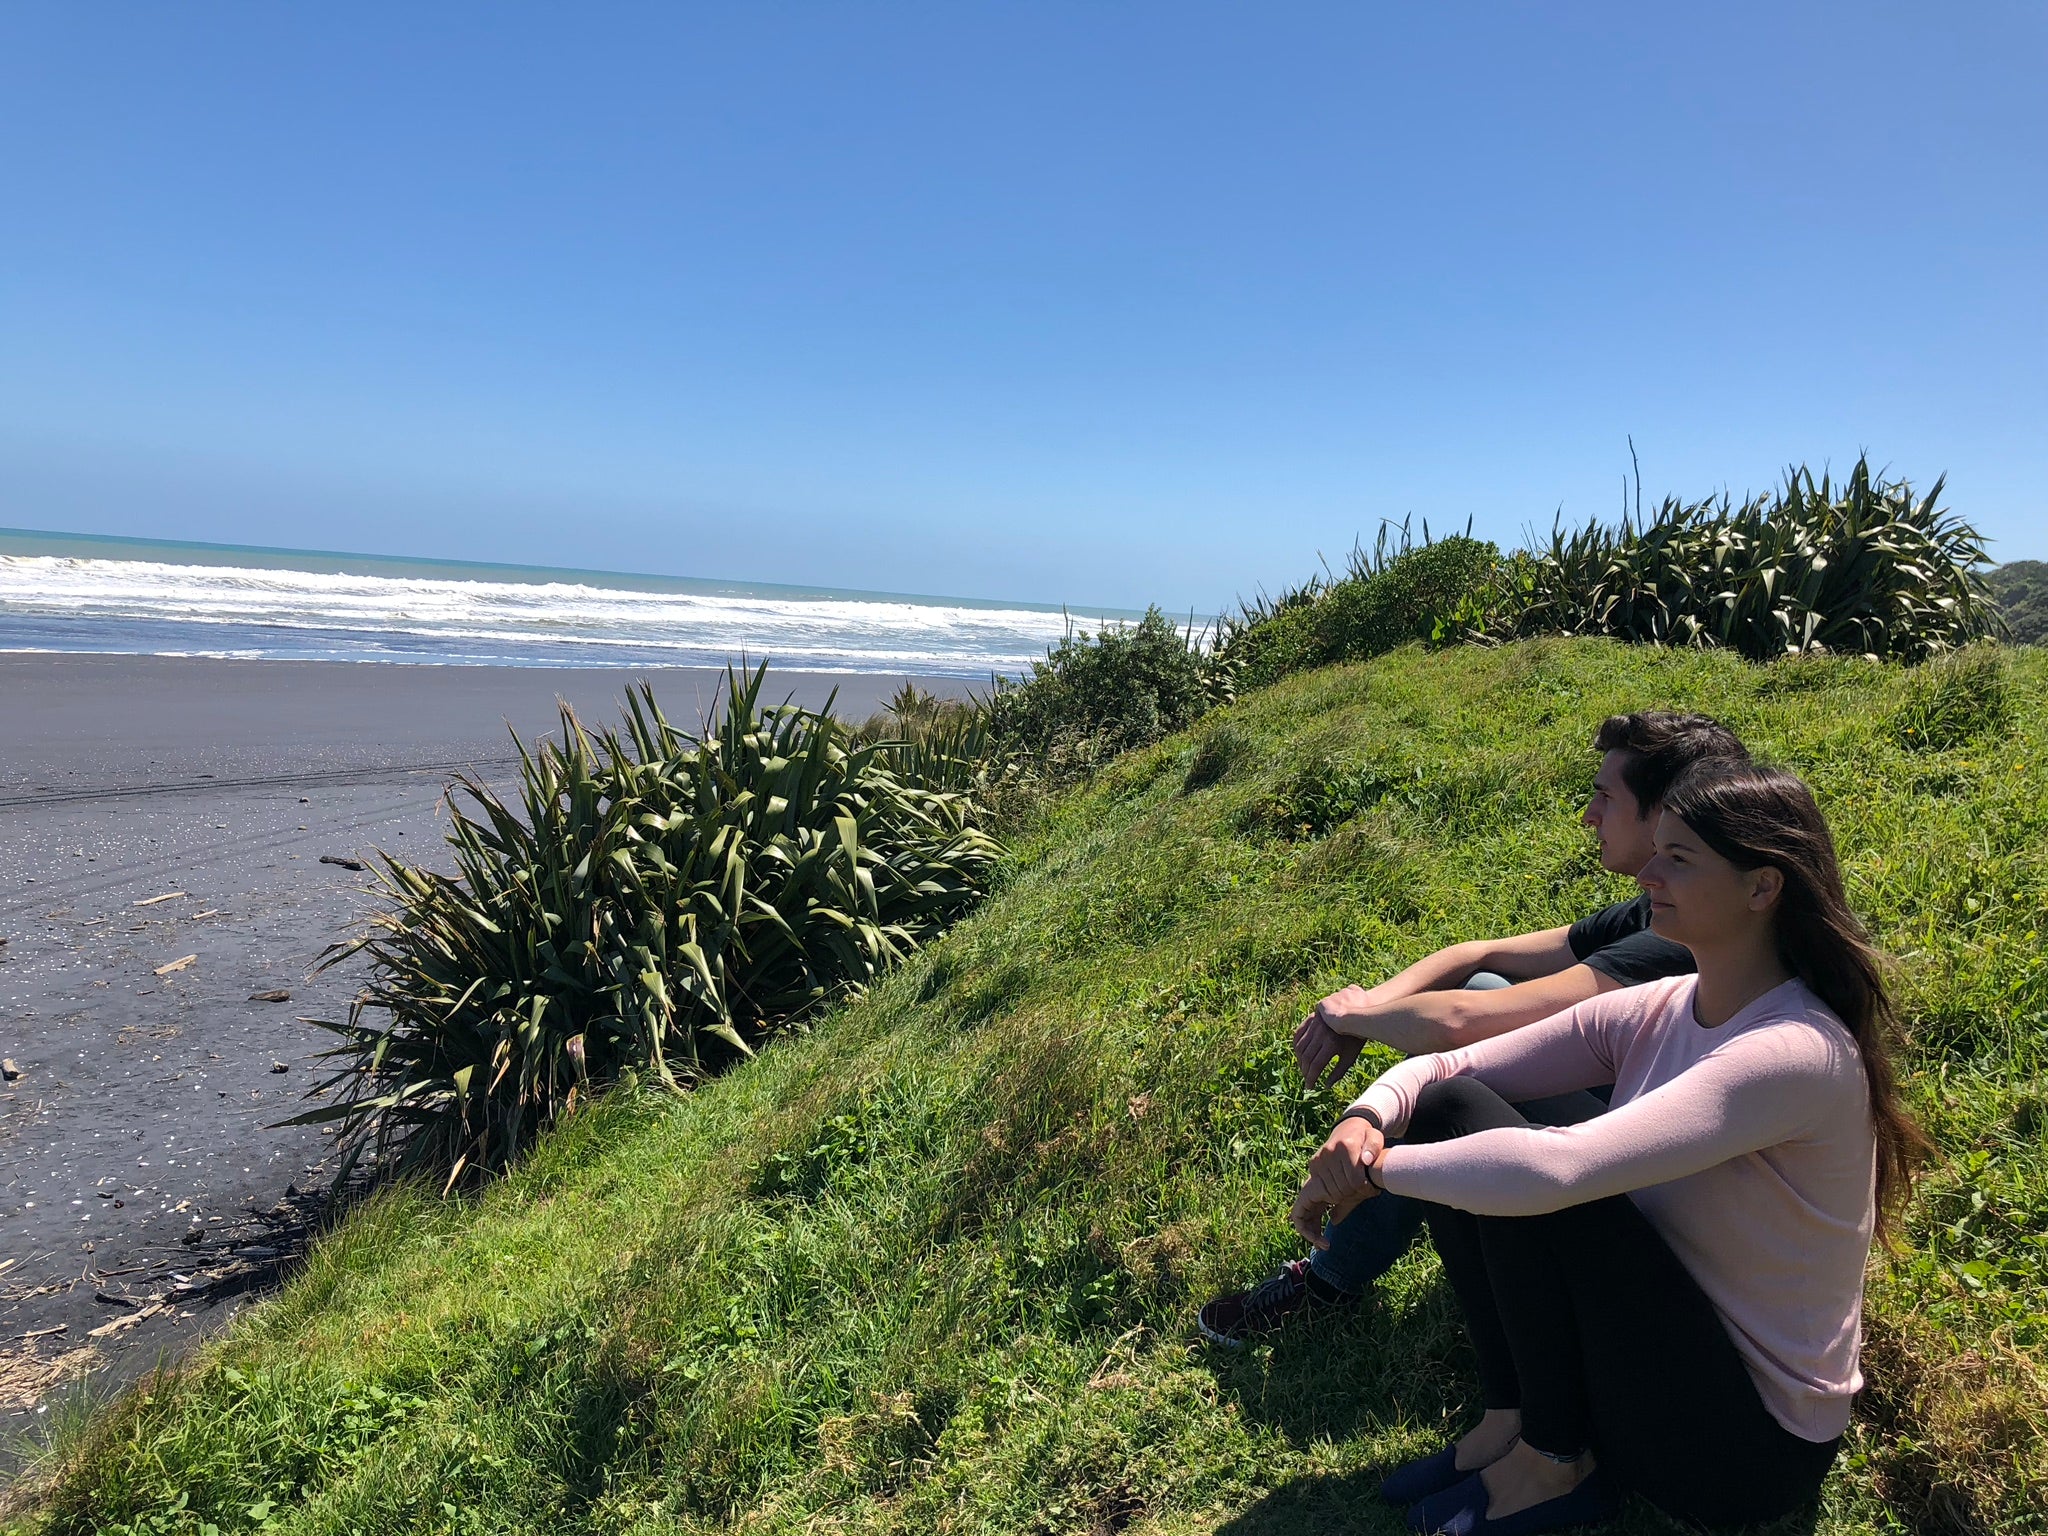 A woman and a man sit side-by-side in the grass overlooking the ocean and a black sand beach in New Zealand.